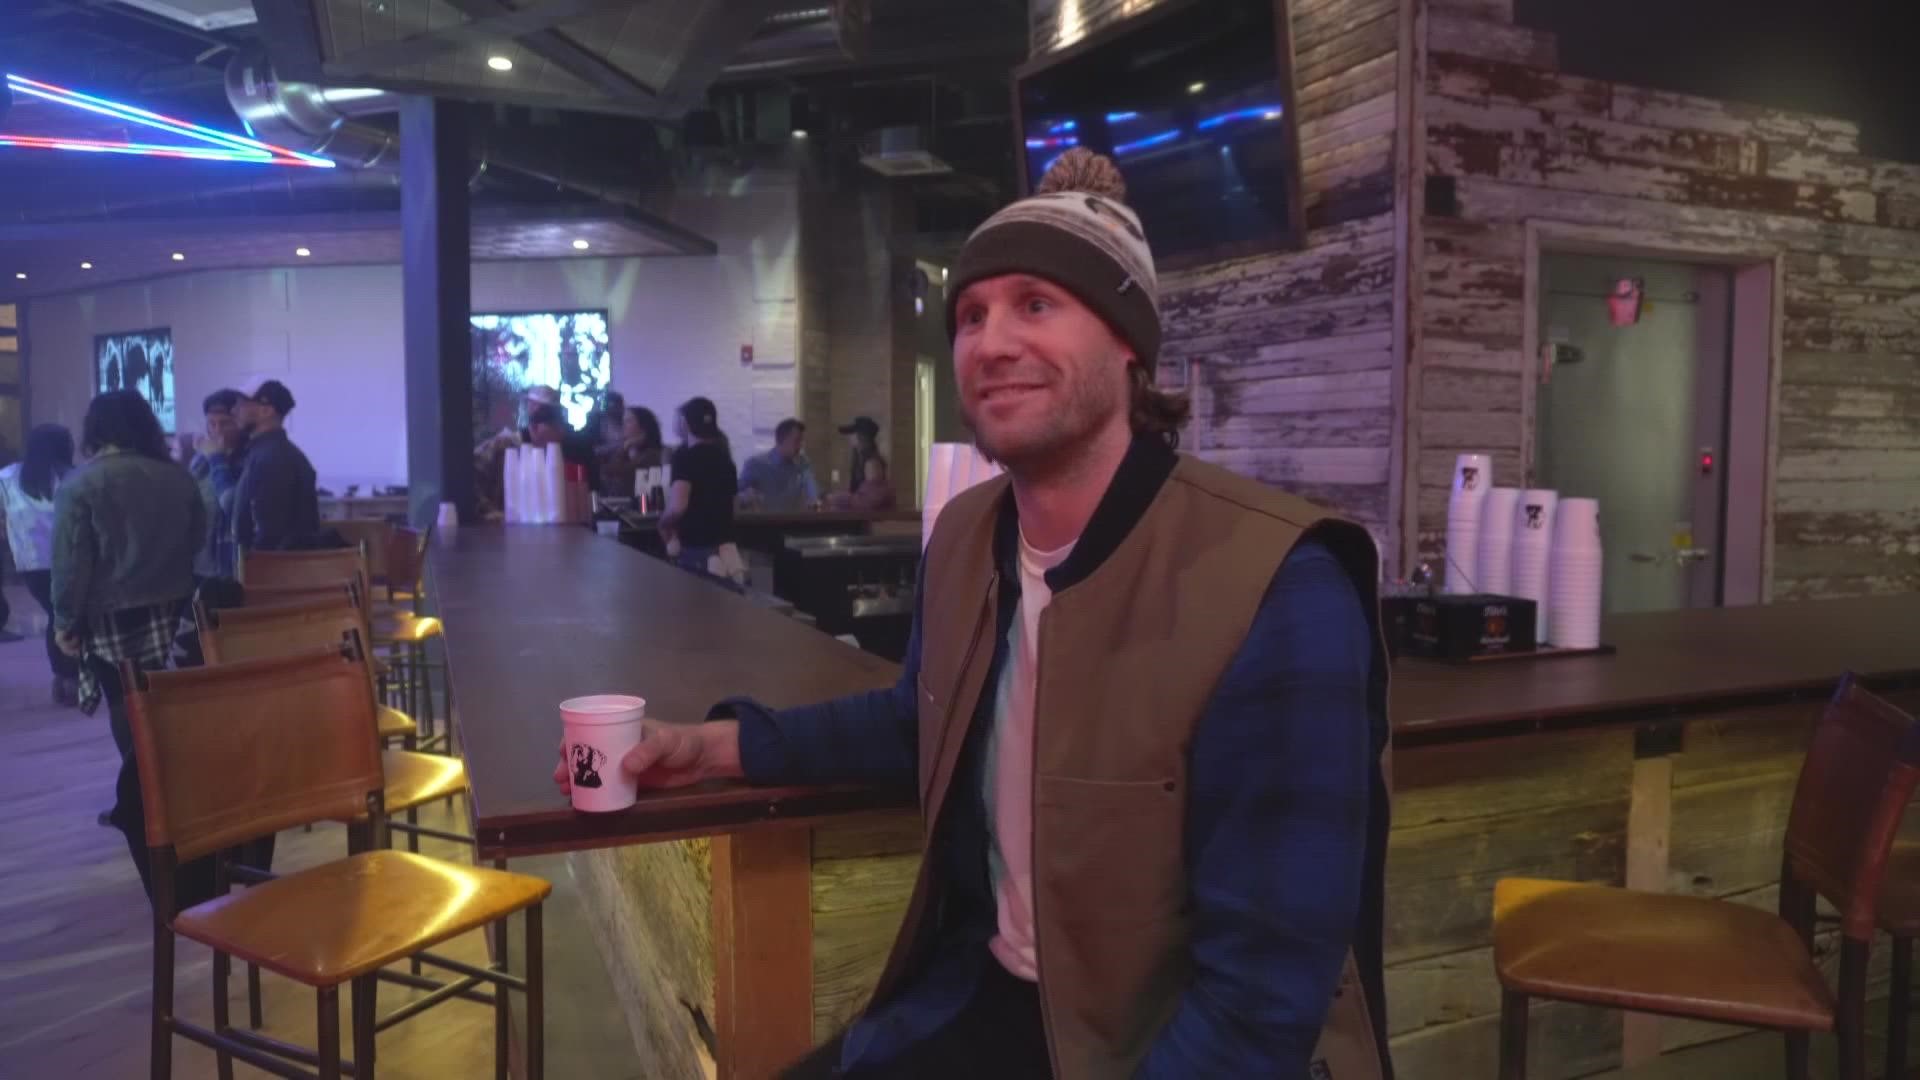 Country music star Chase Rice gives us a look inside his bar in Cleveland known as Welcome to the Farm.